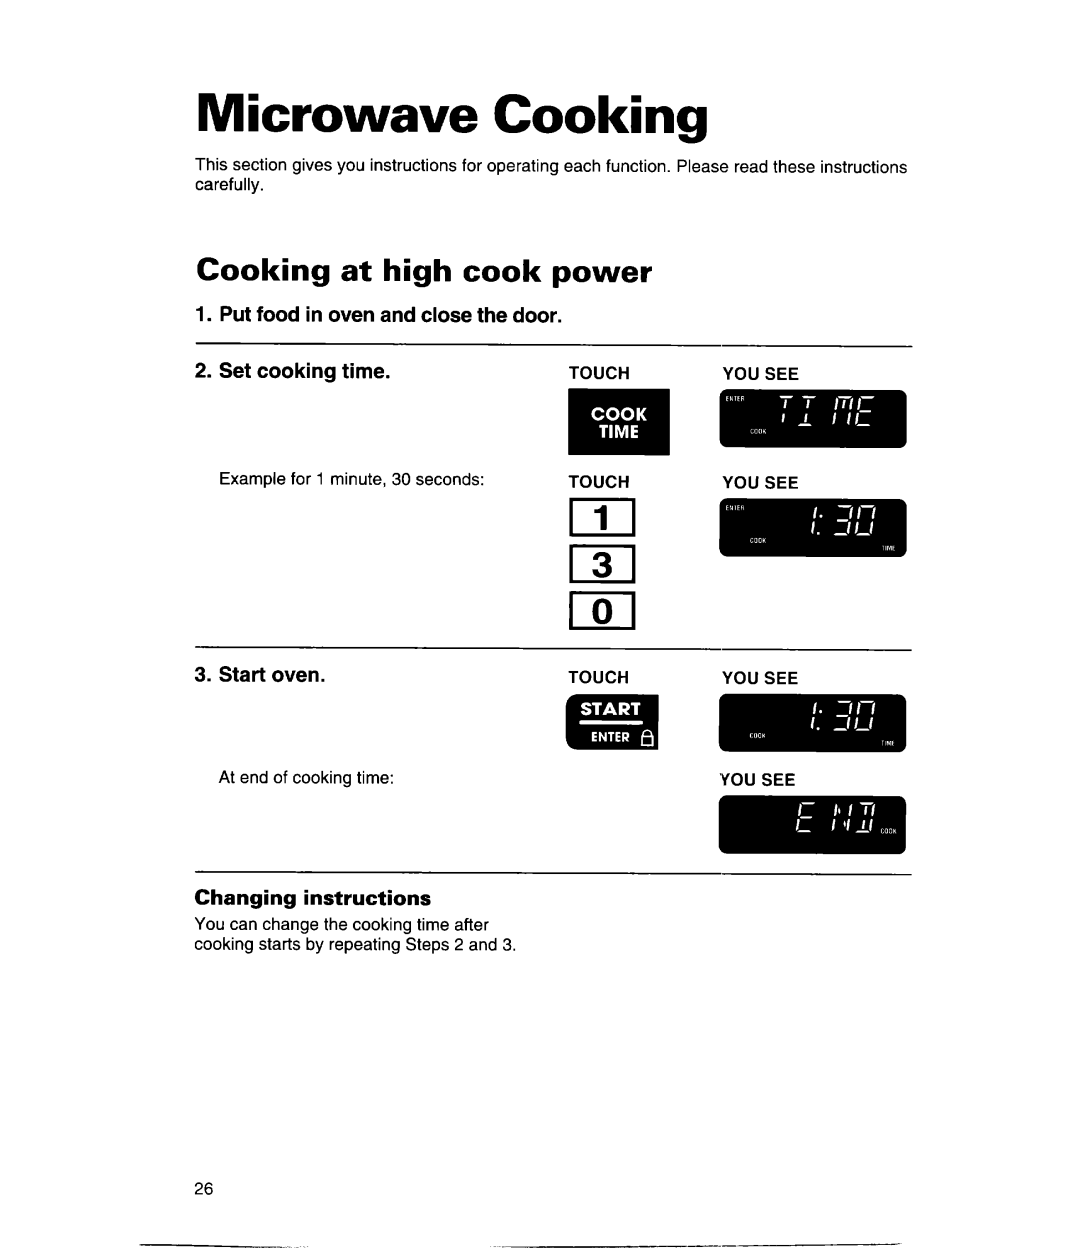 Whirlpool MH9115XE Microwave Cooking, Cooking at high cook power, Put food in oven and close the door, Set cooking time 